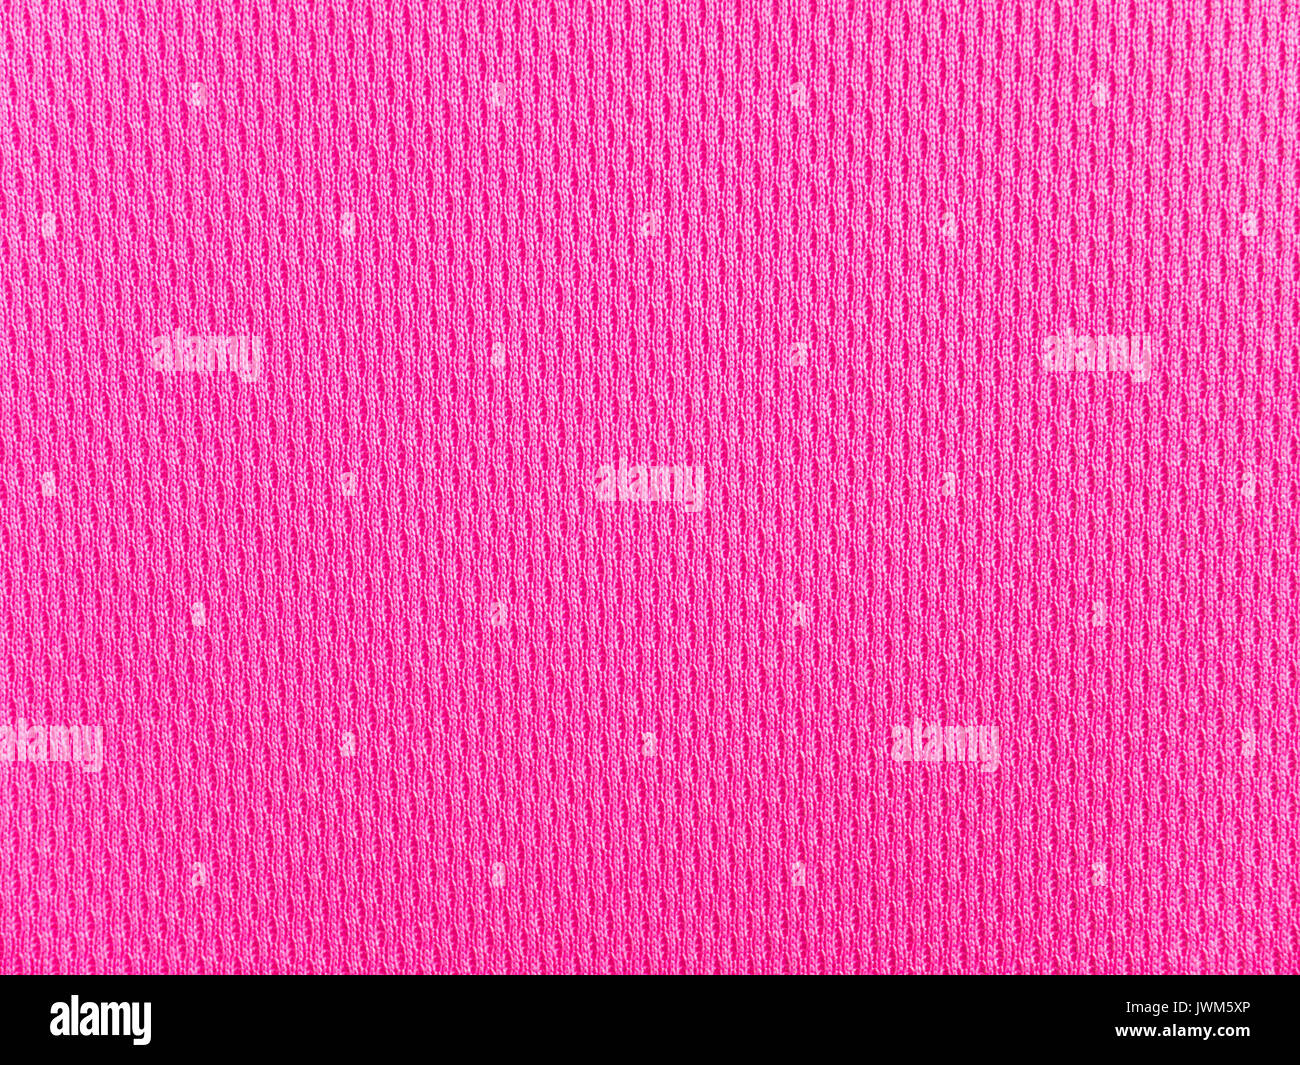 Bright pink polyester sportwear knitted fabric texture Stock Photo